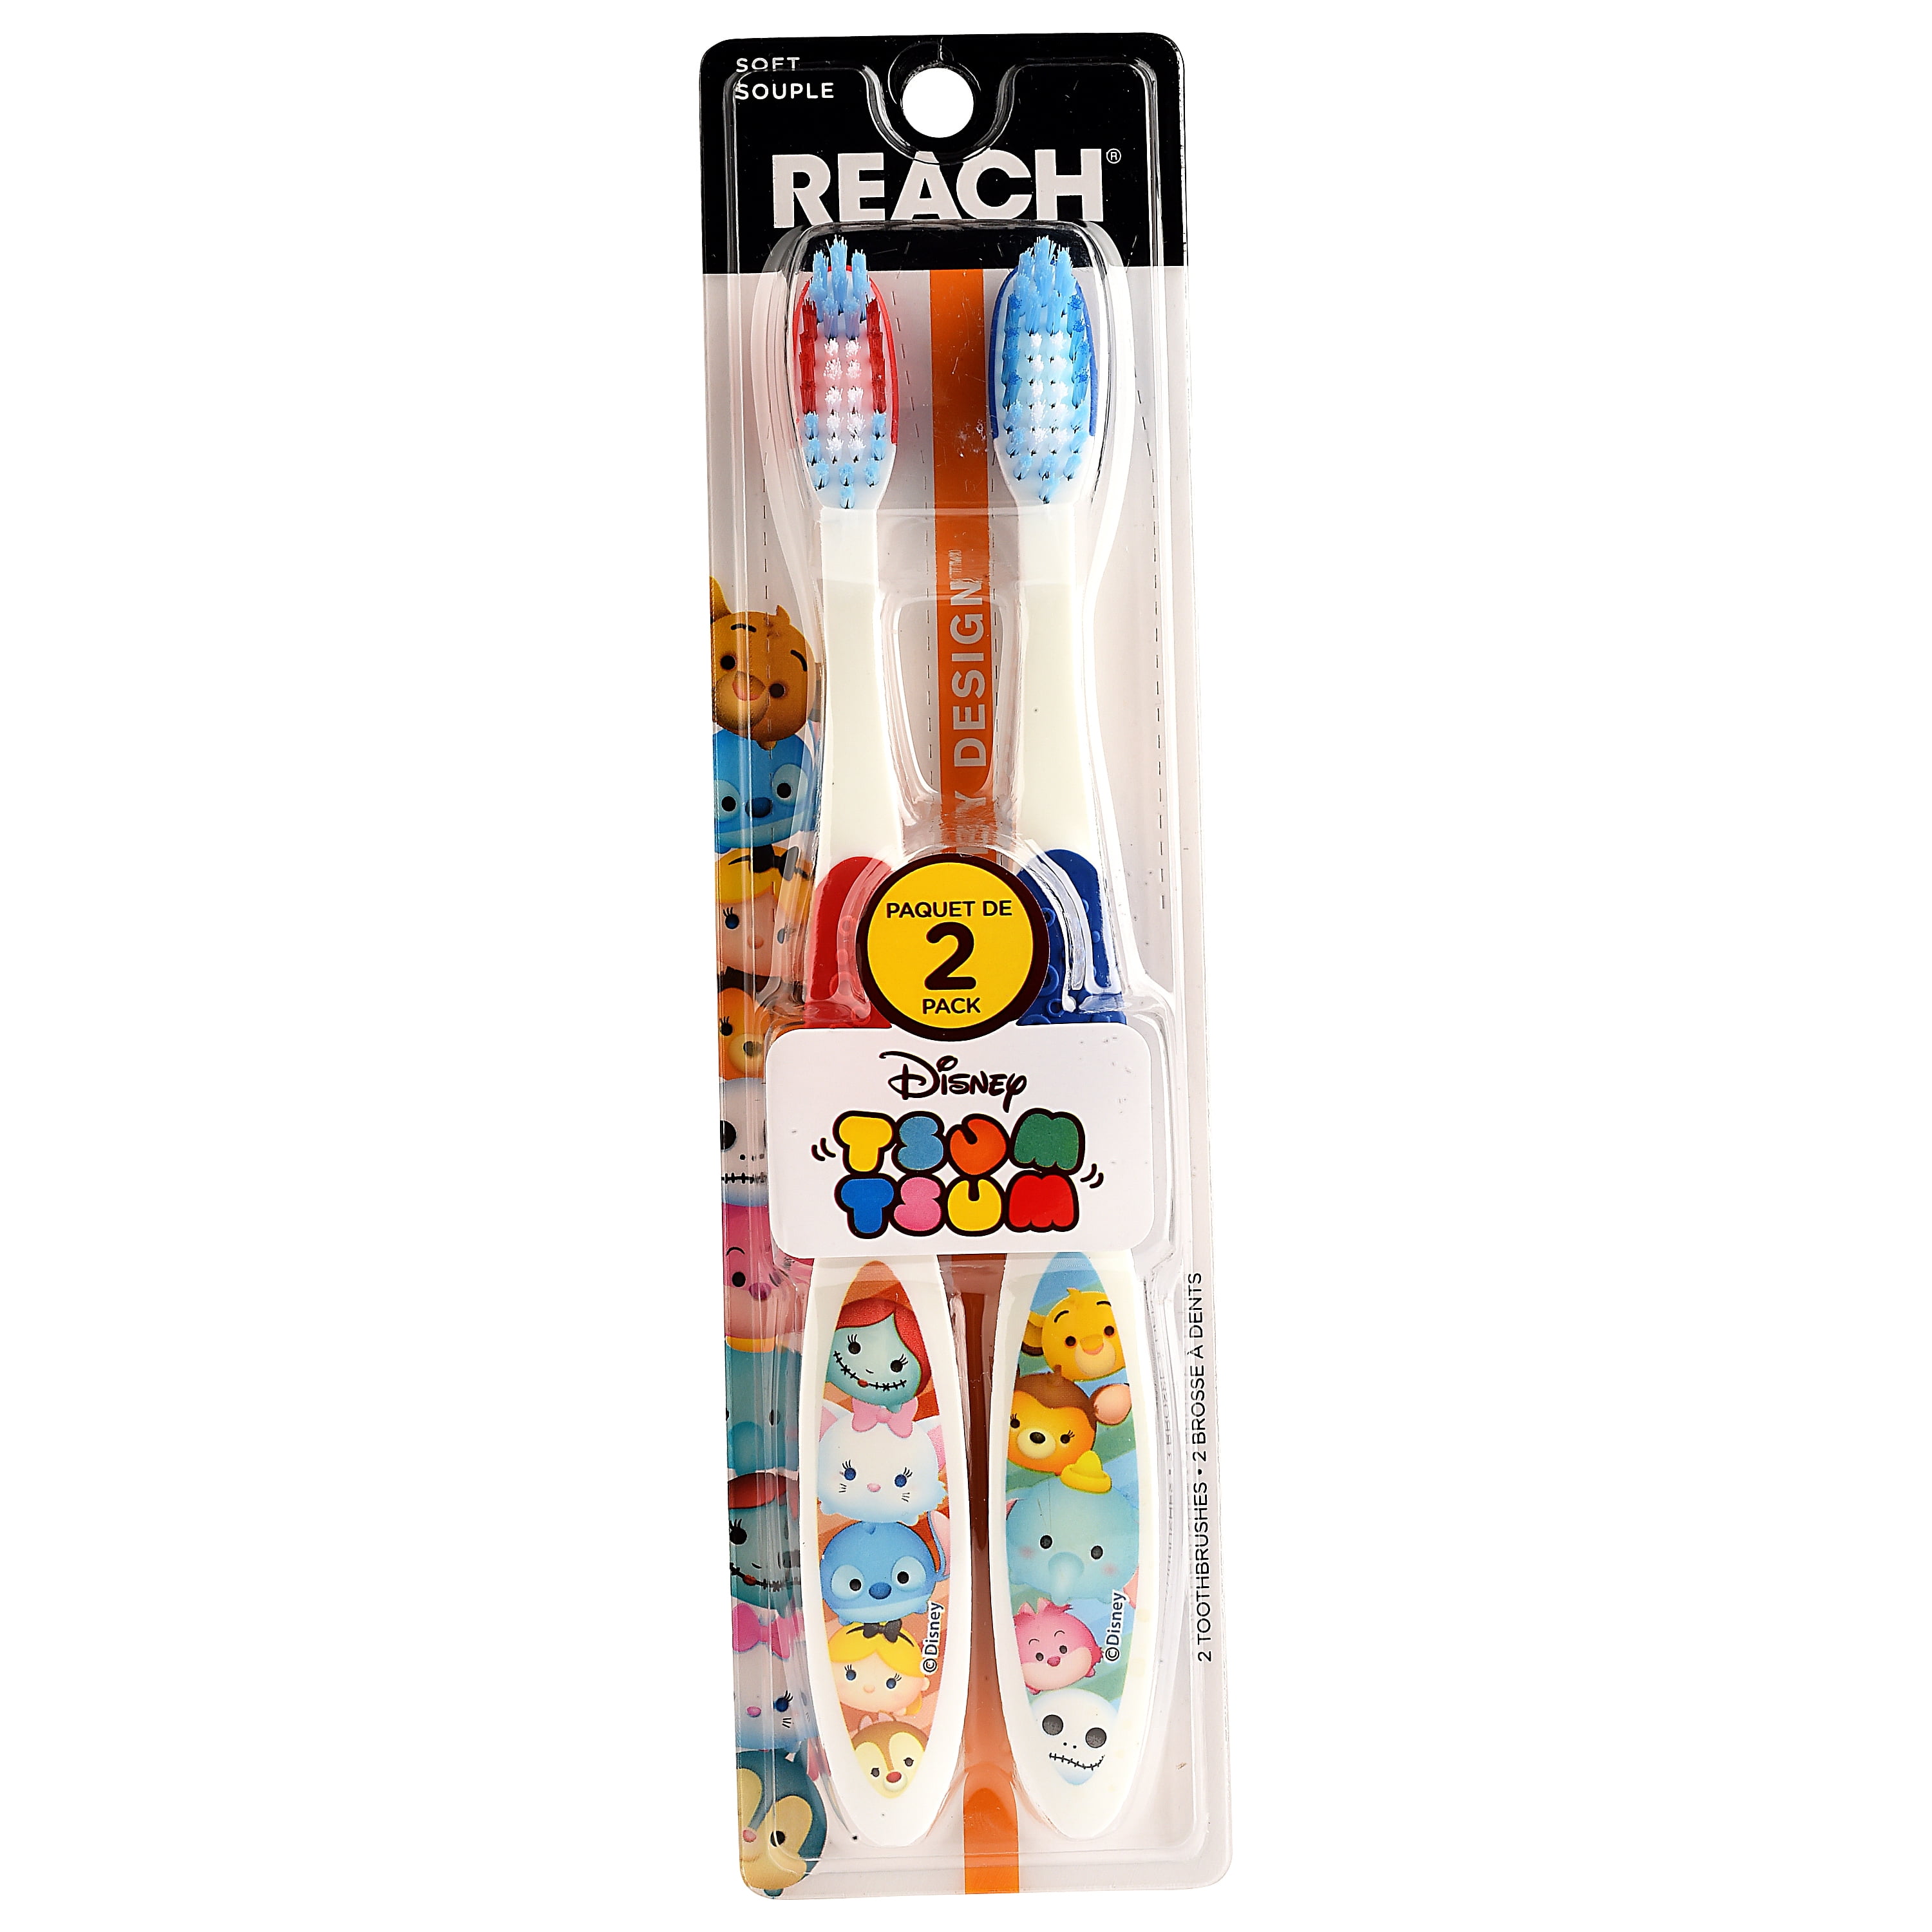 Phineas and Ferb Perry the Platypus REACH Toothbrushes ~ Pack of 3 Toothbrushes! 